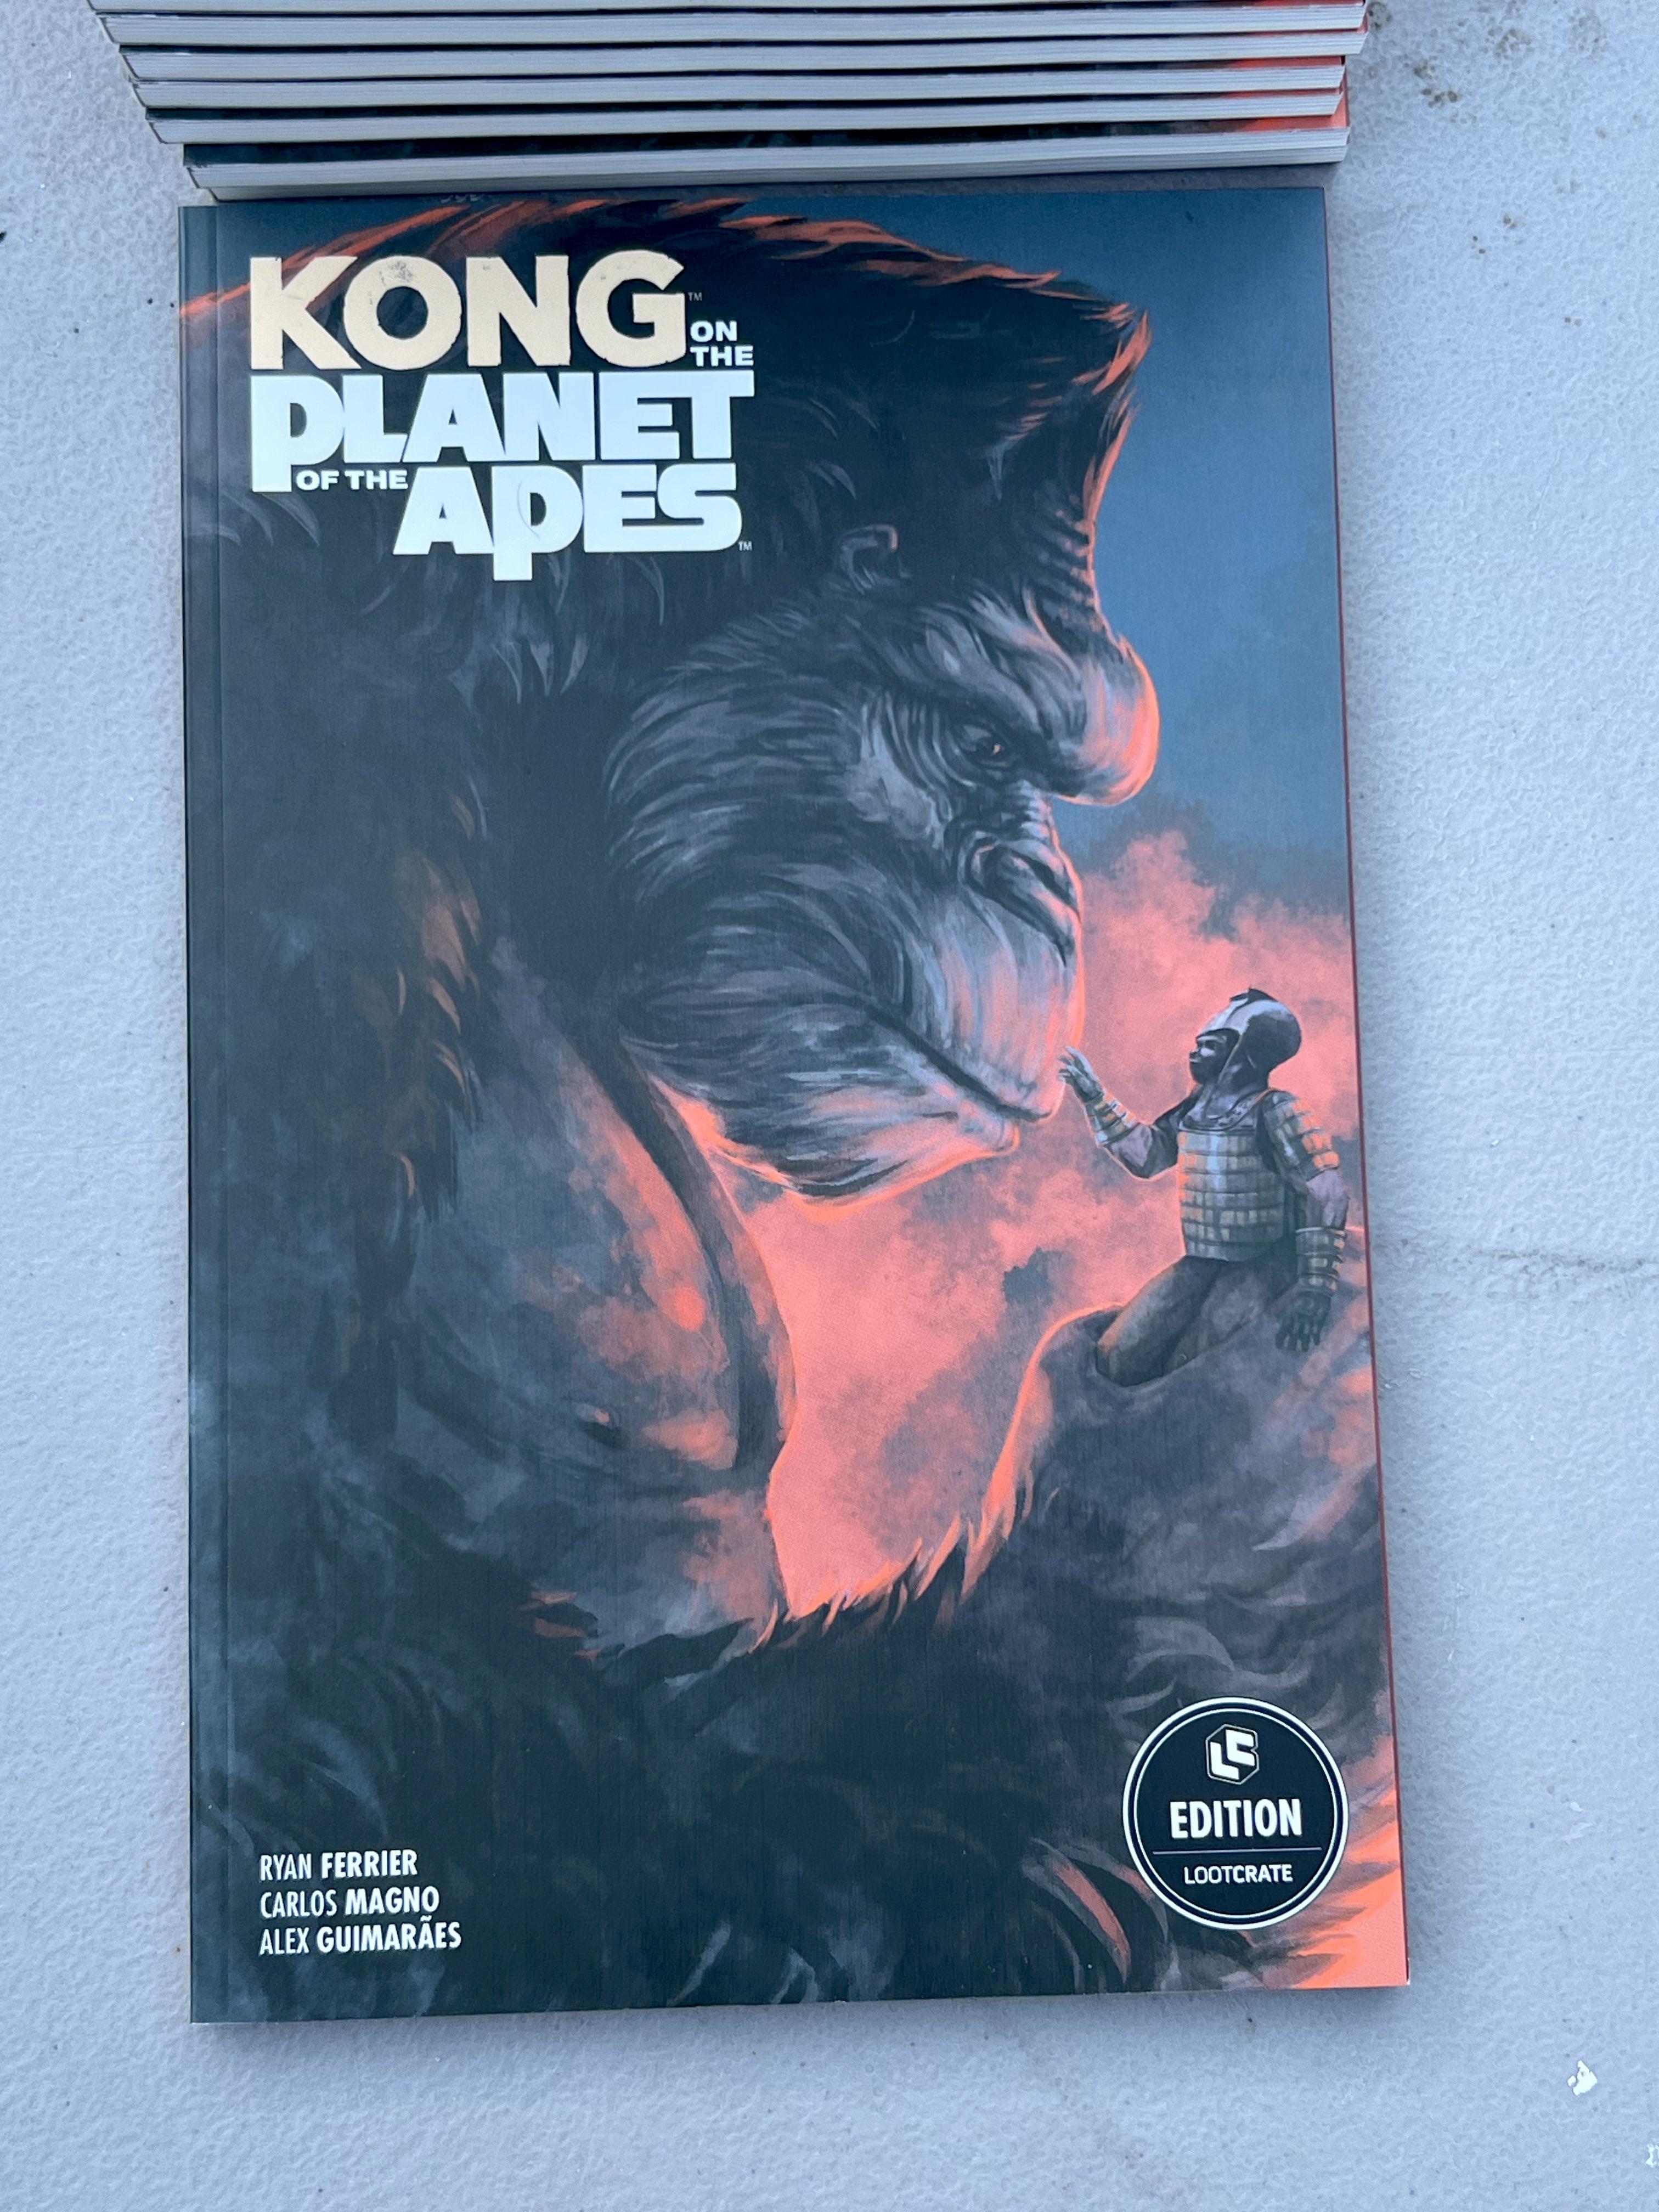 Comic Book Kong Planet of the Apes Boom comics collection lot 10 New